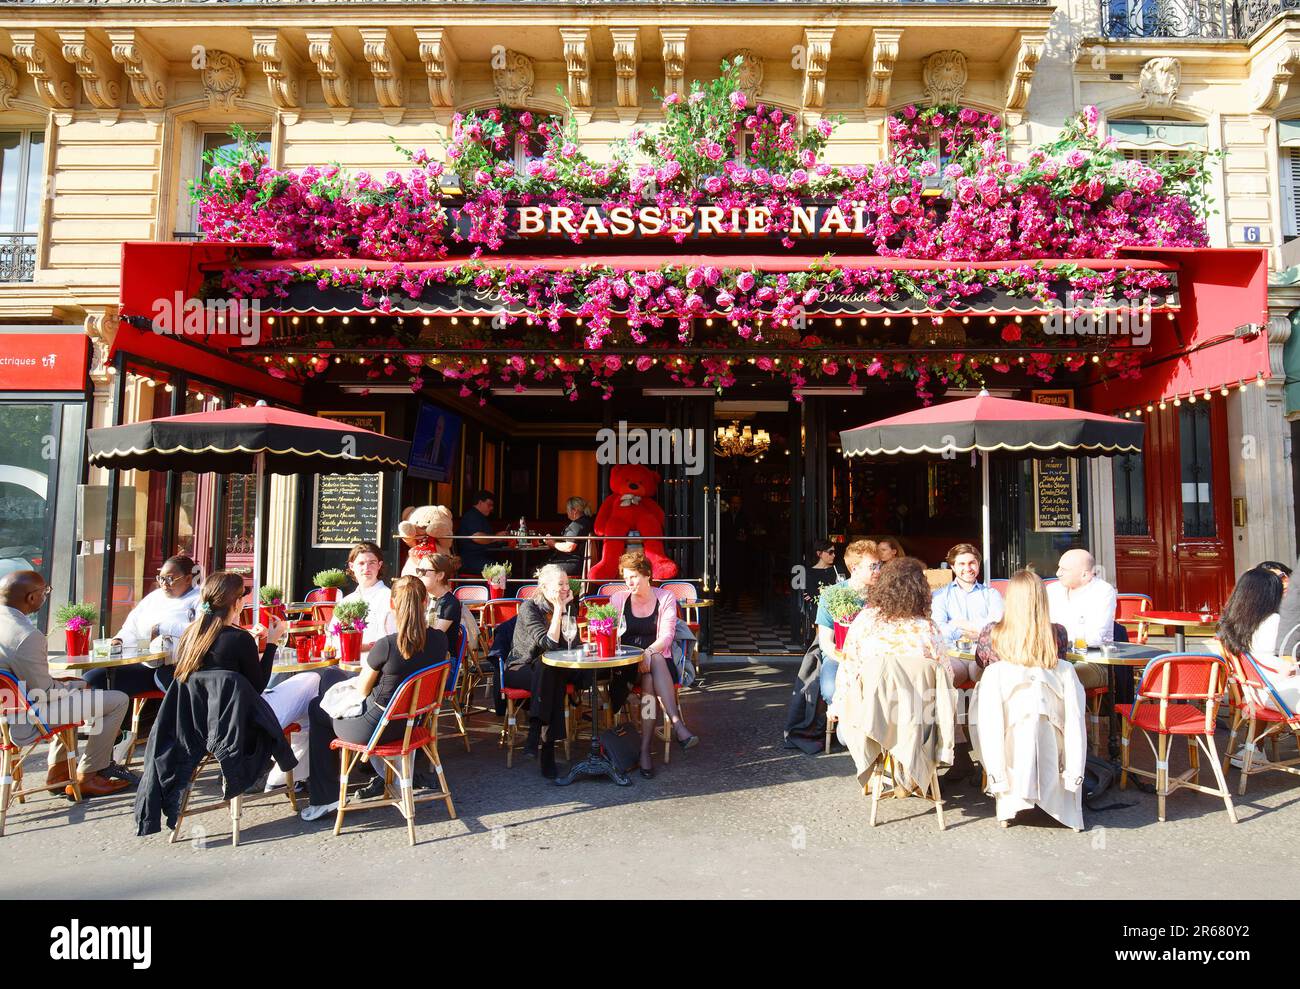 The Cafe Brasserie Nai is a traditional Lebanese cafe located near Triumphal Arch, Paris, France. Stock Photo